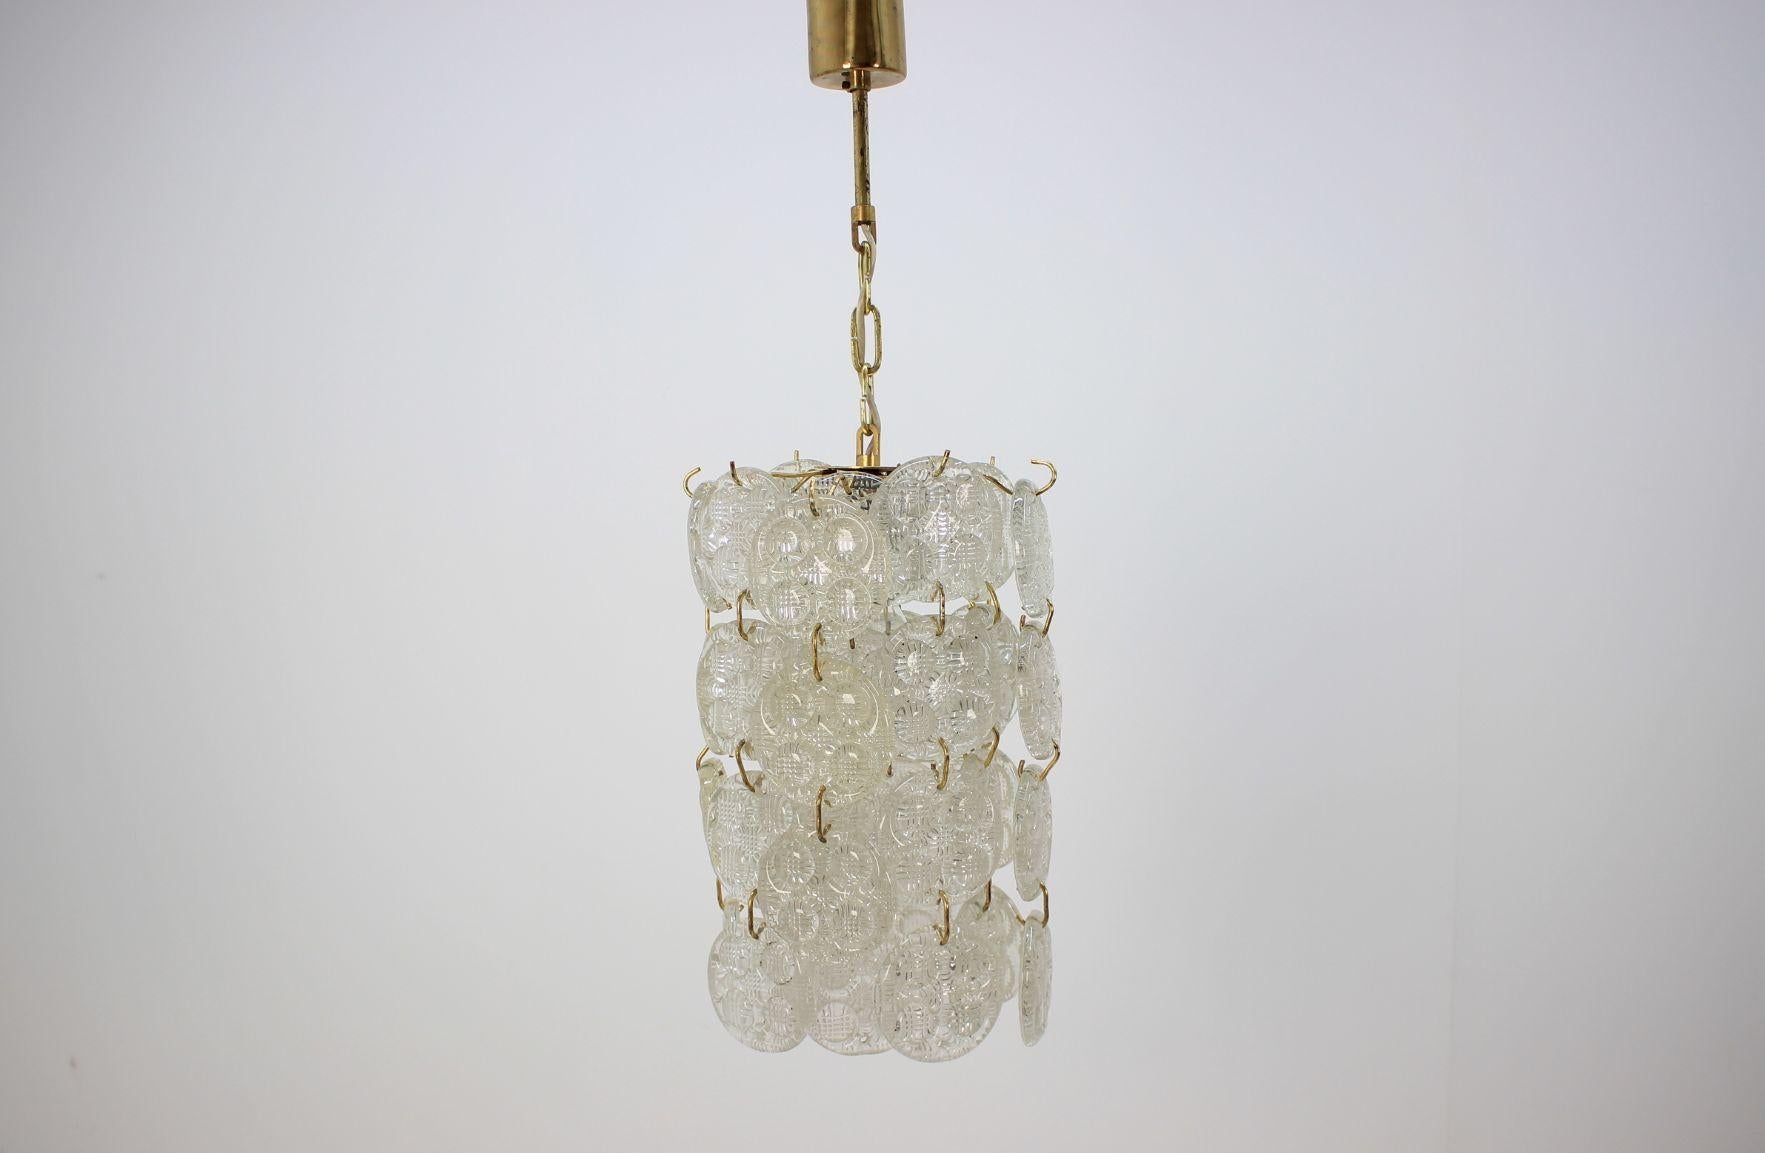 - Very nice style of lighting
- 45 pendants from glass.
 